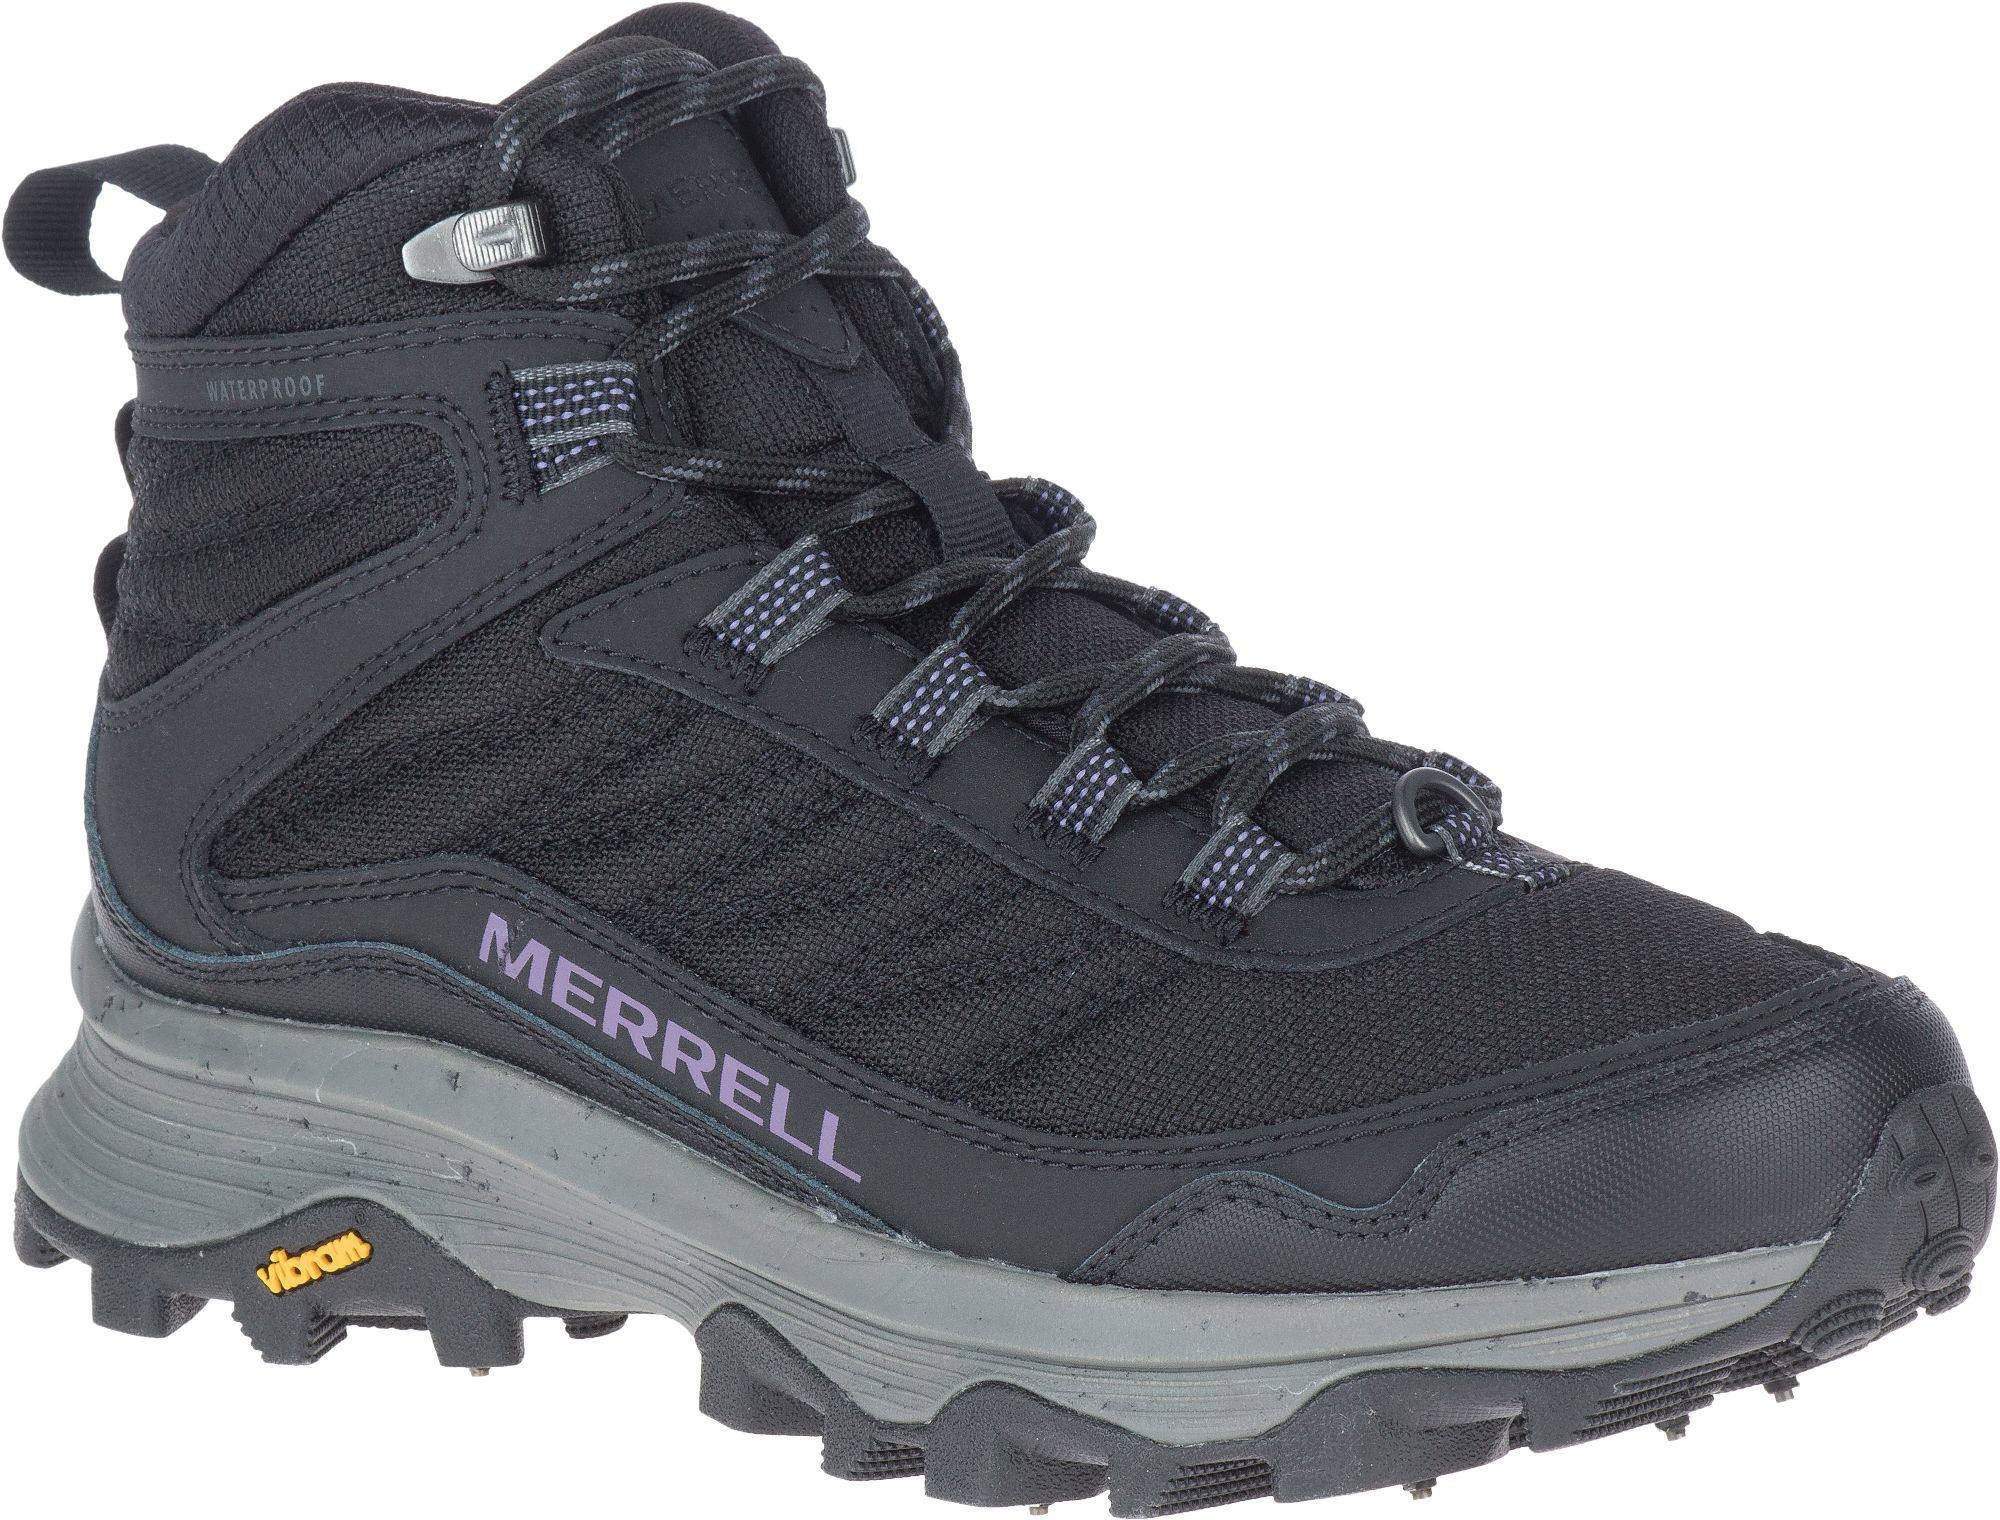 Merrell Women’s Speed Thermo Spike Mid